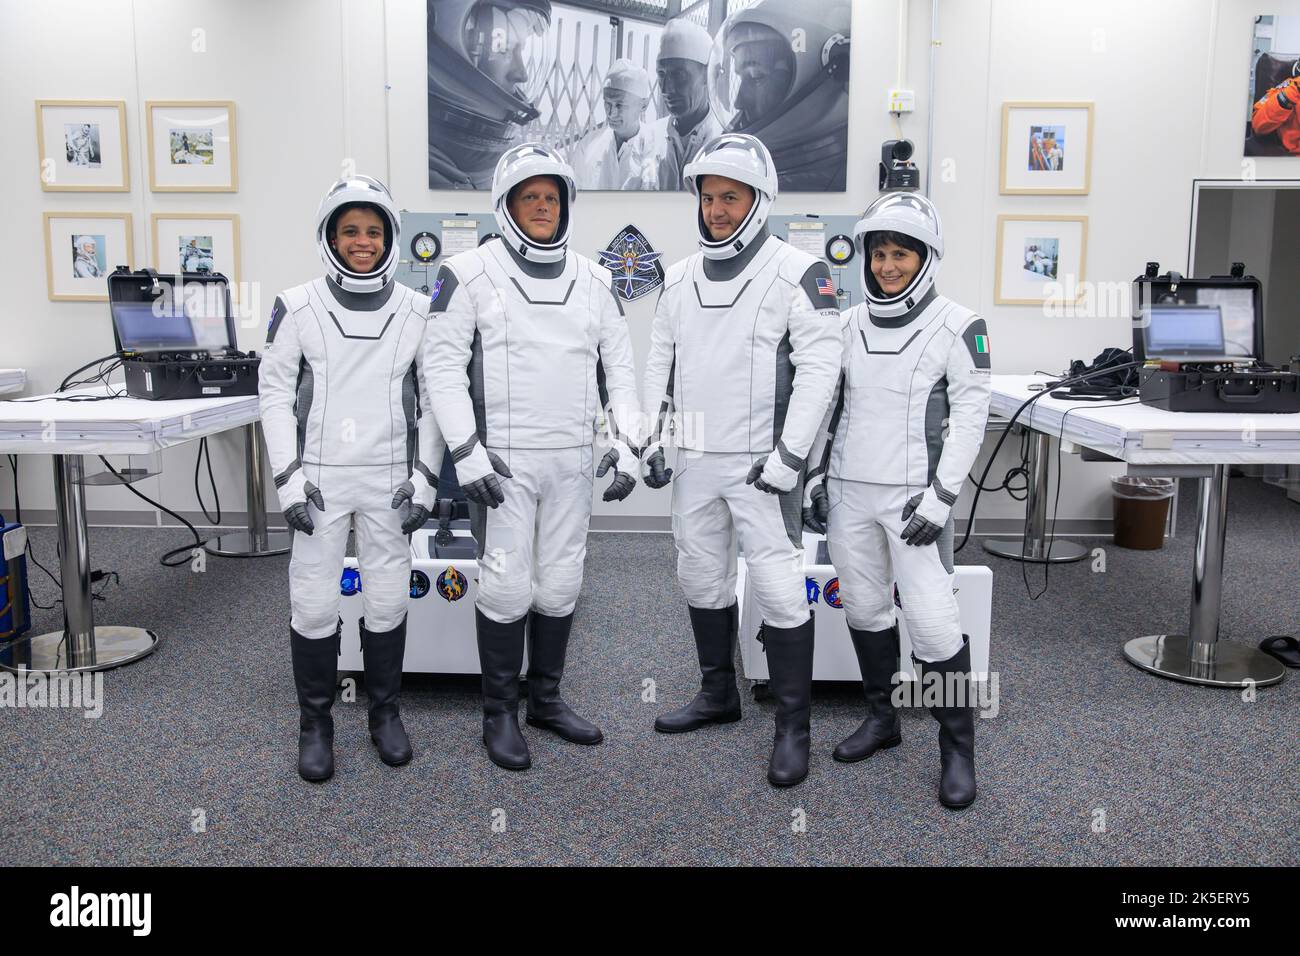 Crew-4 mission astronauts participate in NASA’s SpaceX Crew-4 dry dress rehearsal in the suit room inside Kennedy Space Center’s Neil A. Armstrong Operations and Checkout Building on April 20, 2022. A team of SpaceX suit technicians assisted them as they put on their custom-fitted spacesuits and checked the suits for leaks. From left are: Jessica Watkins, mission specialist; Bob Hines, pilot; Kjell Lindgren, commander; and Samantha Cristoforetti, mission specialist. SpaceX’s Falcon 9 rocket and Crew Dragon, named Freedom by the Crew-4 crew, will launch the astronauts to the International Space Stock Photo